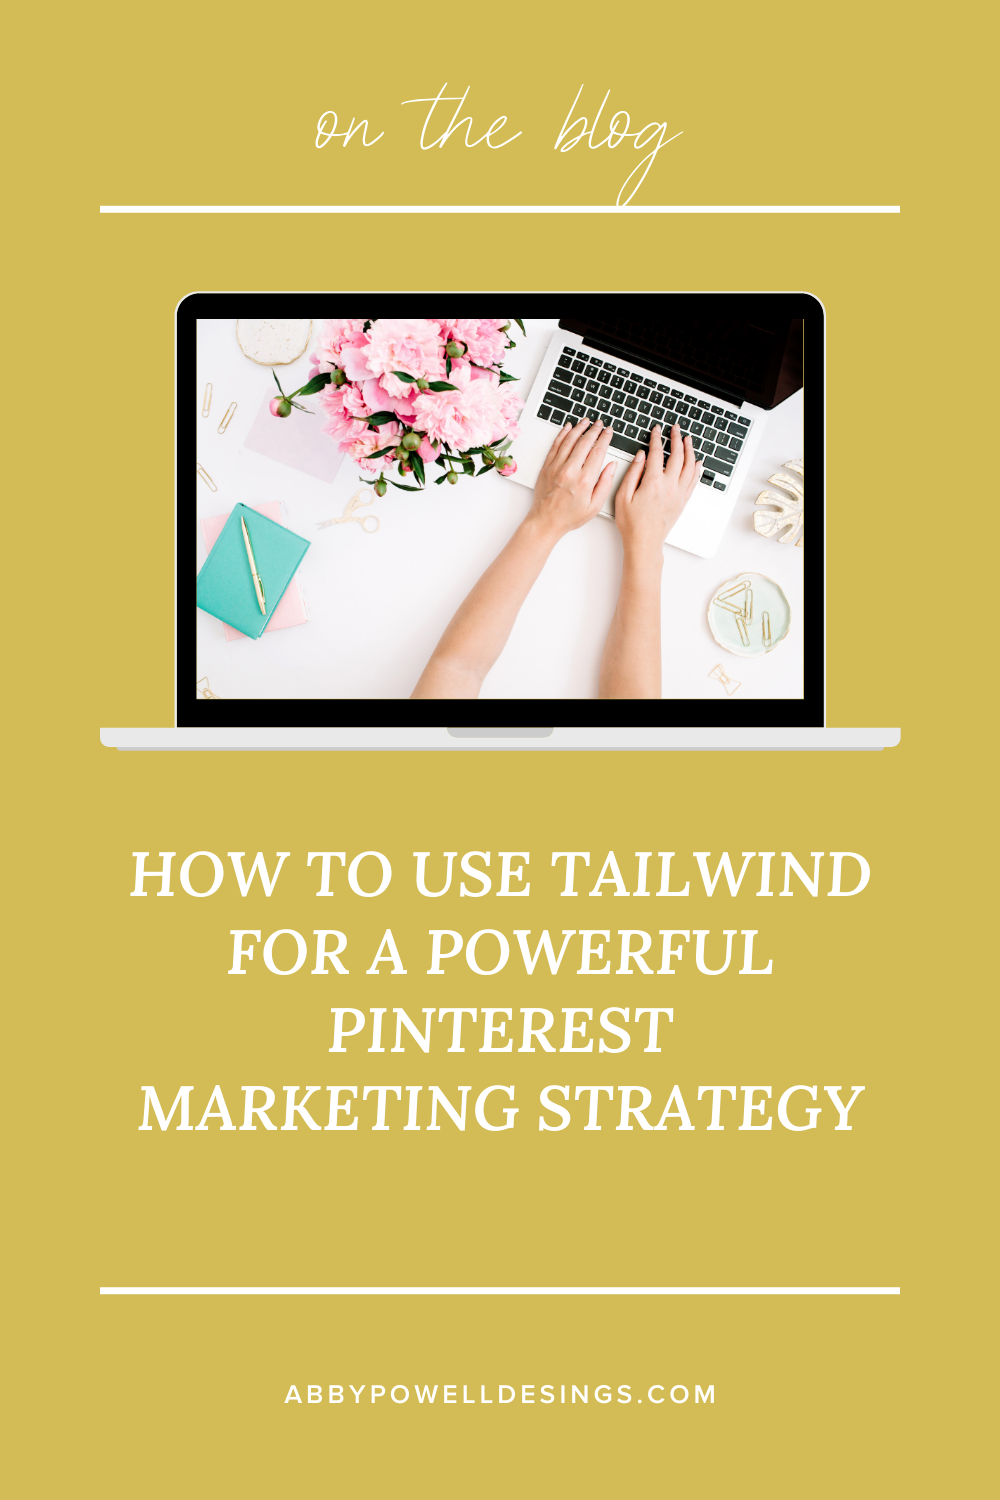 Use Tailwind for a simple and powerful Pinterest marketing strategy